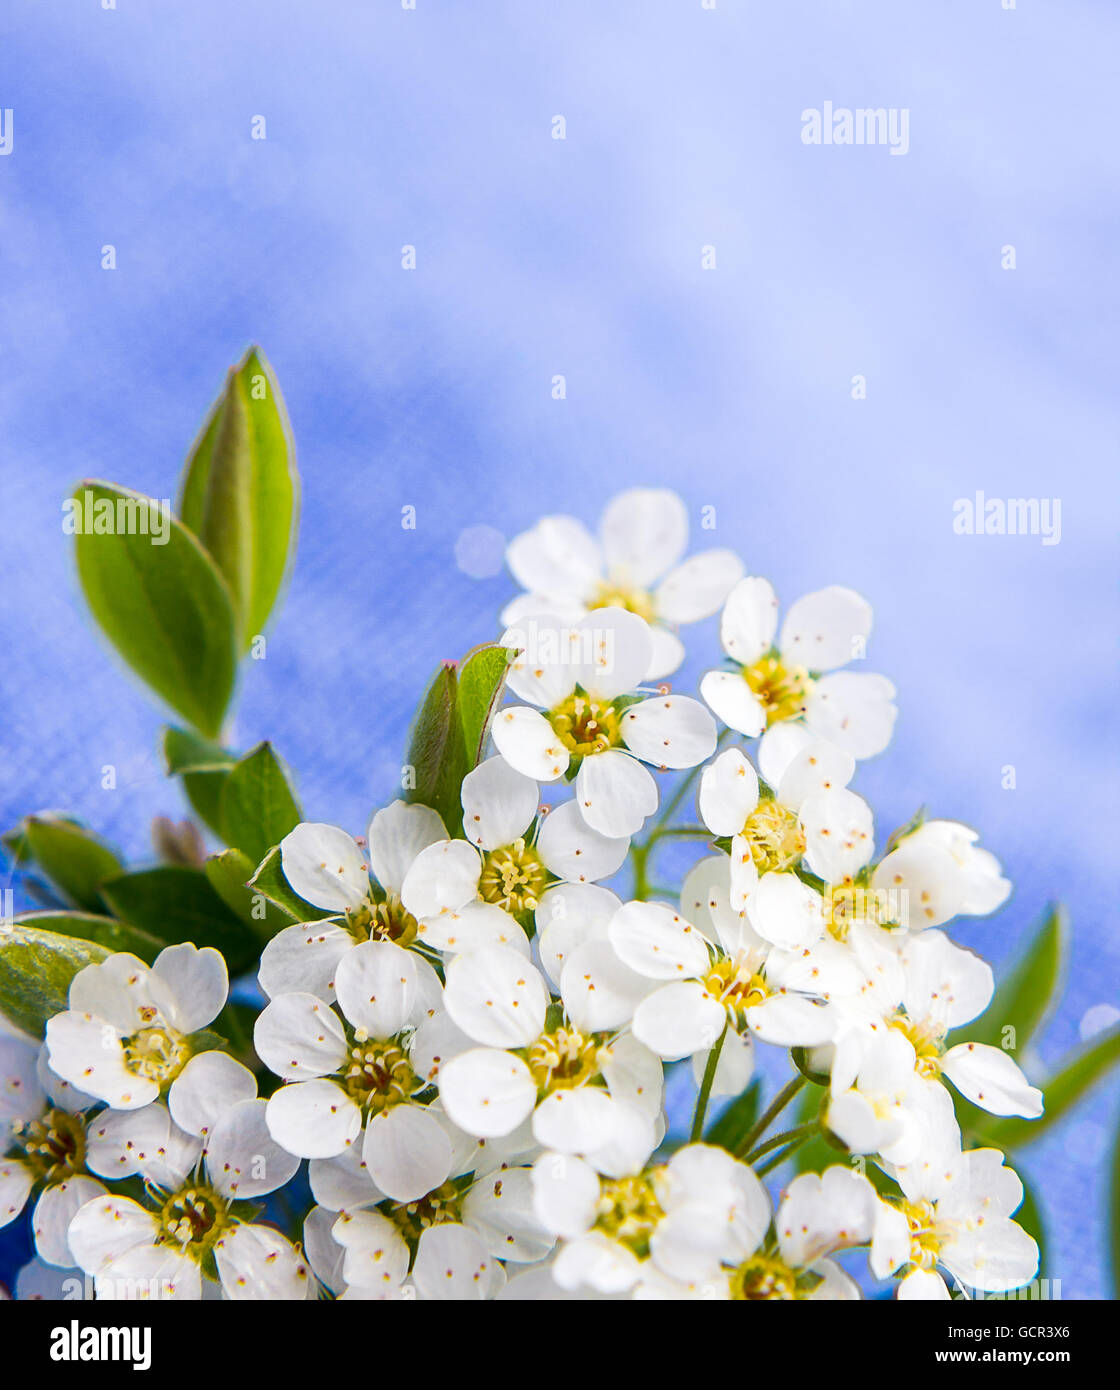 Small white flowers blurred on blue background, soft focus Stock Photo